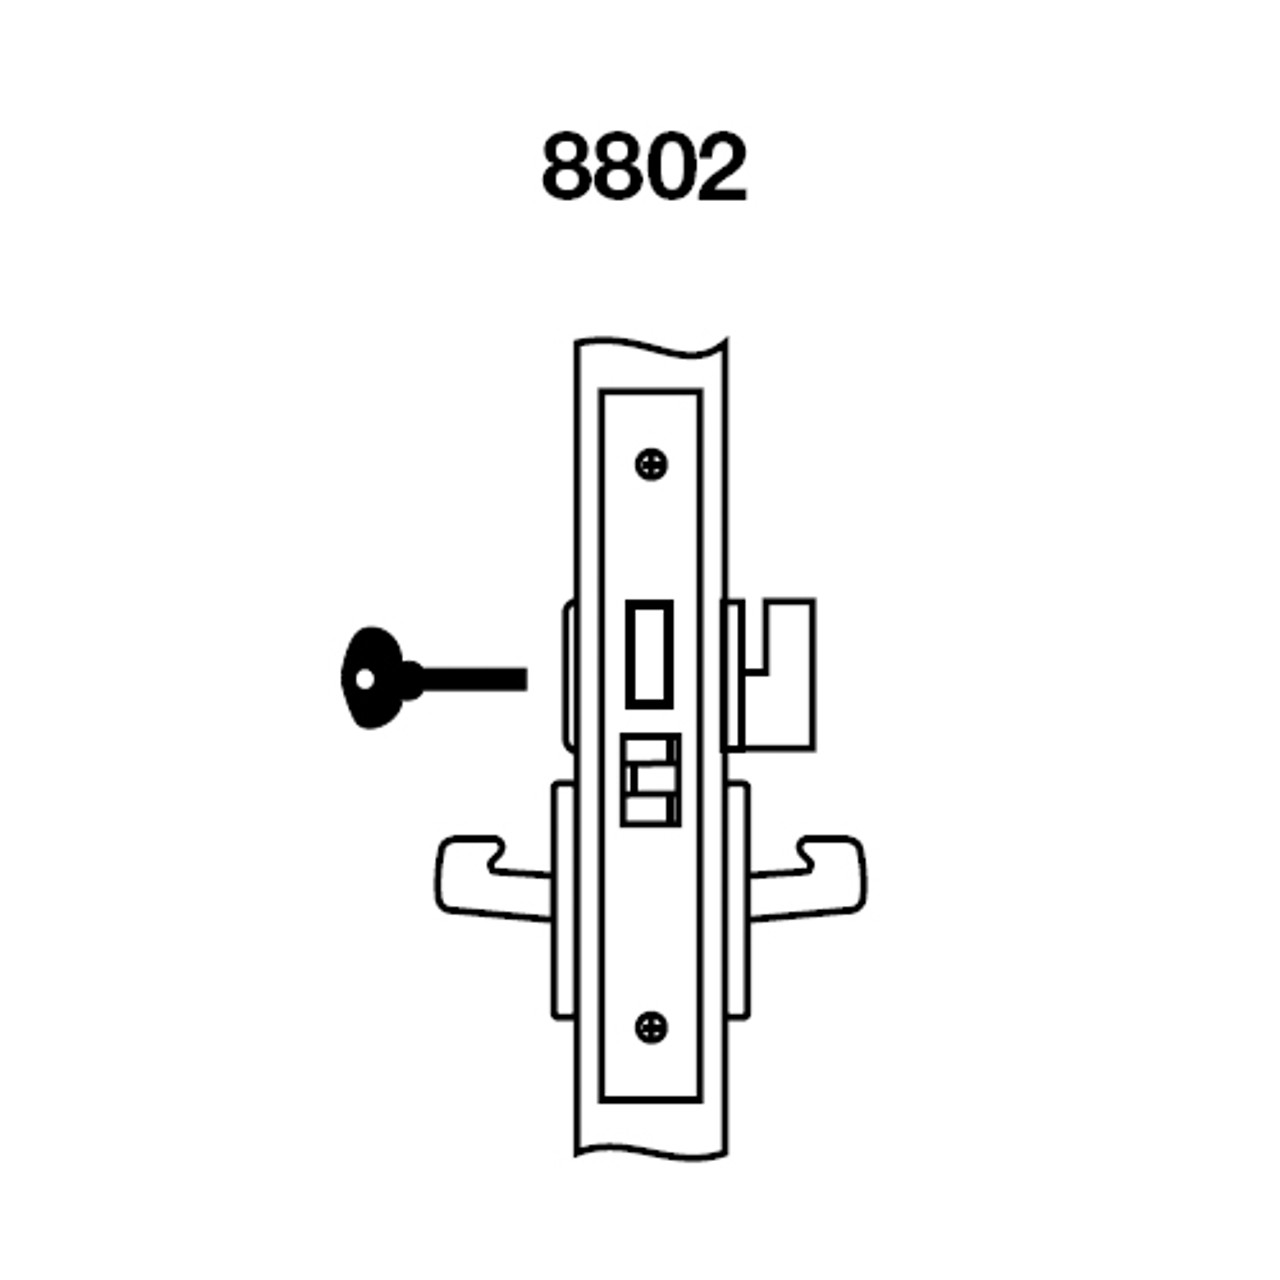 PBCN8802FL-606 Yale 8800FL Series Non-Keyed Mortise Privacy Locks with Pacific Beach Lever in Satin Brass